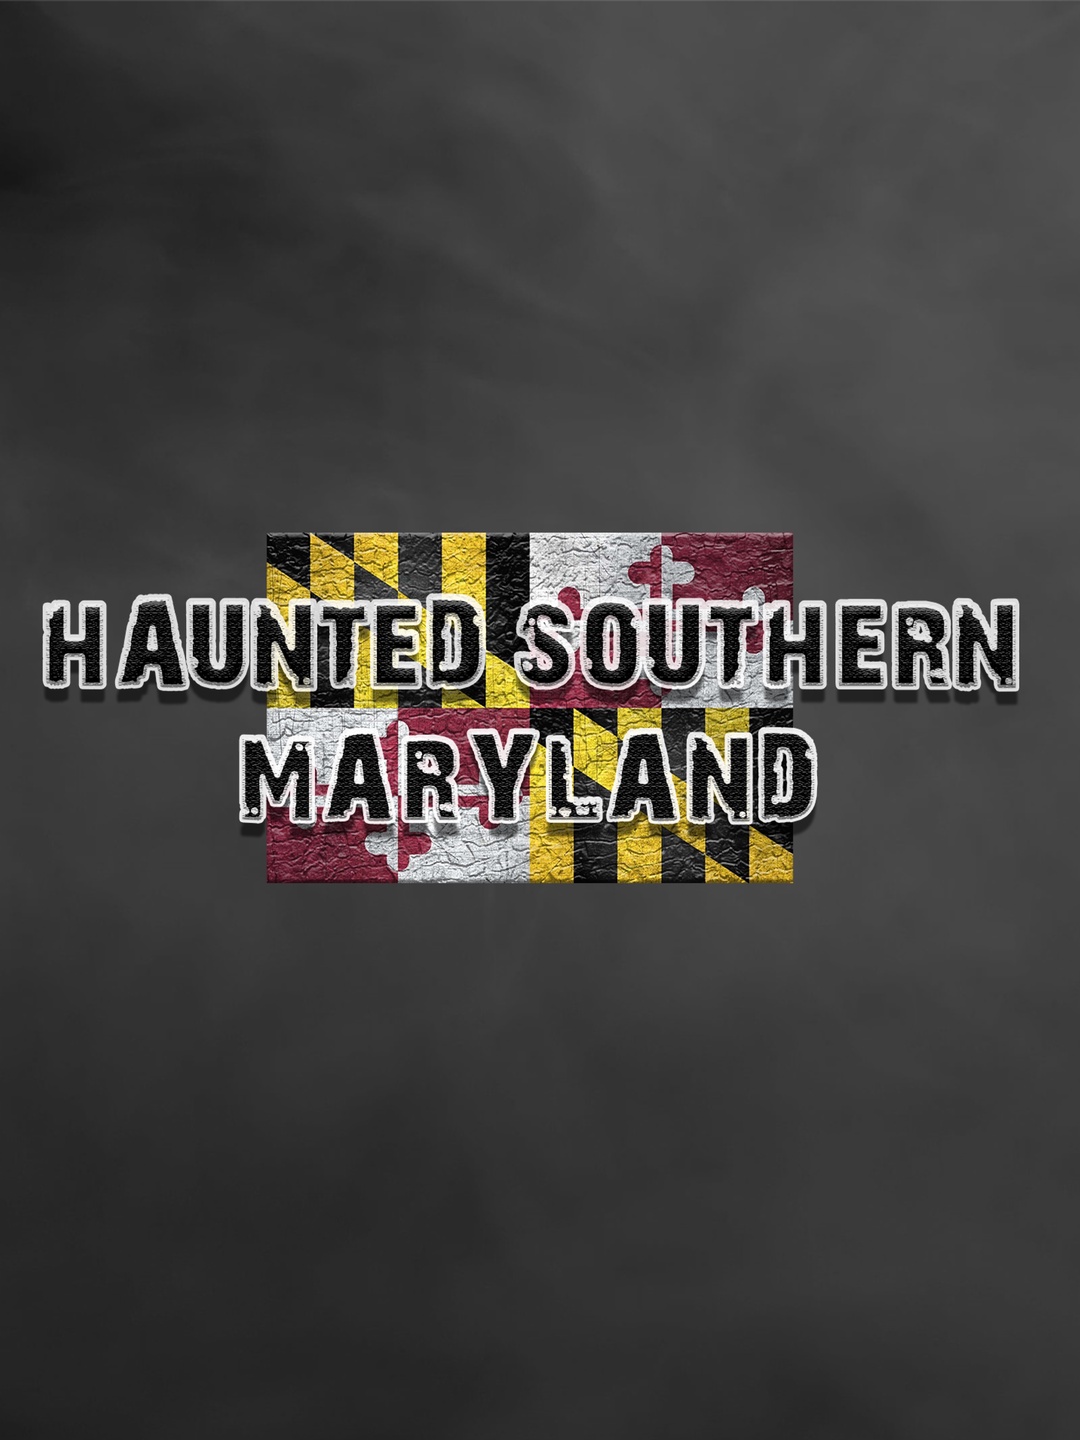 Haunted Southern Maryland